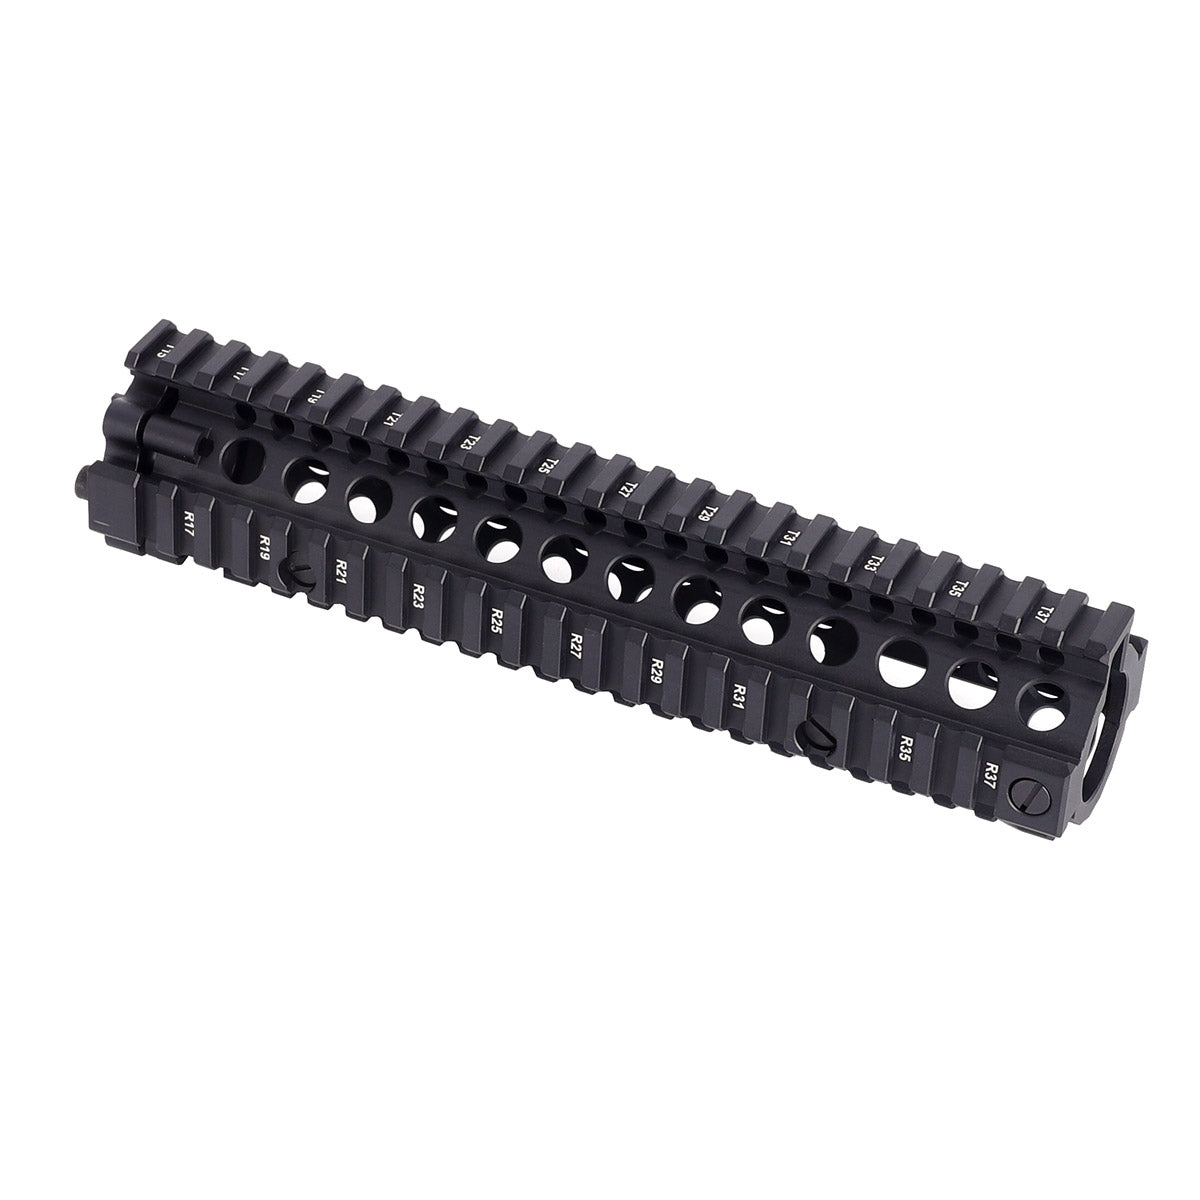 ohhunt® 9.6" Mid-Length MK18 Quad Rail Handguard Free Floating Barrel Two-pieces Drop-in Design for AR-15